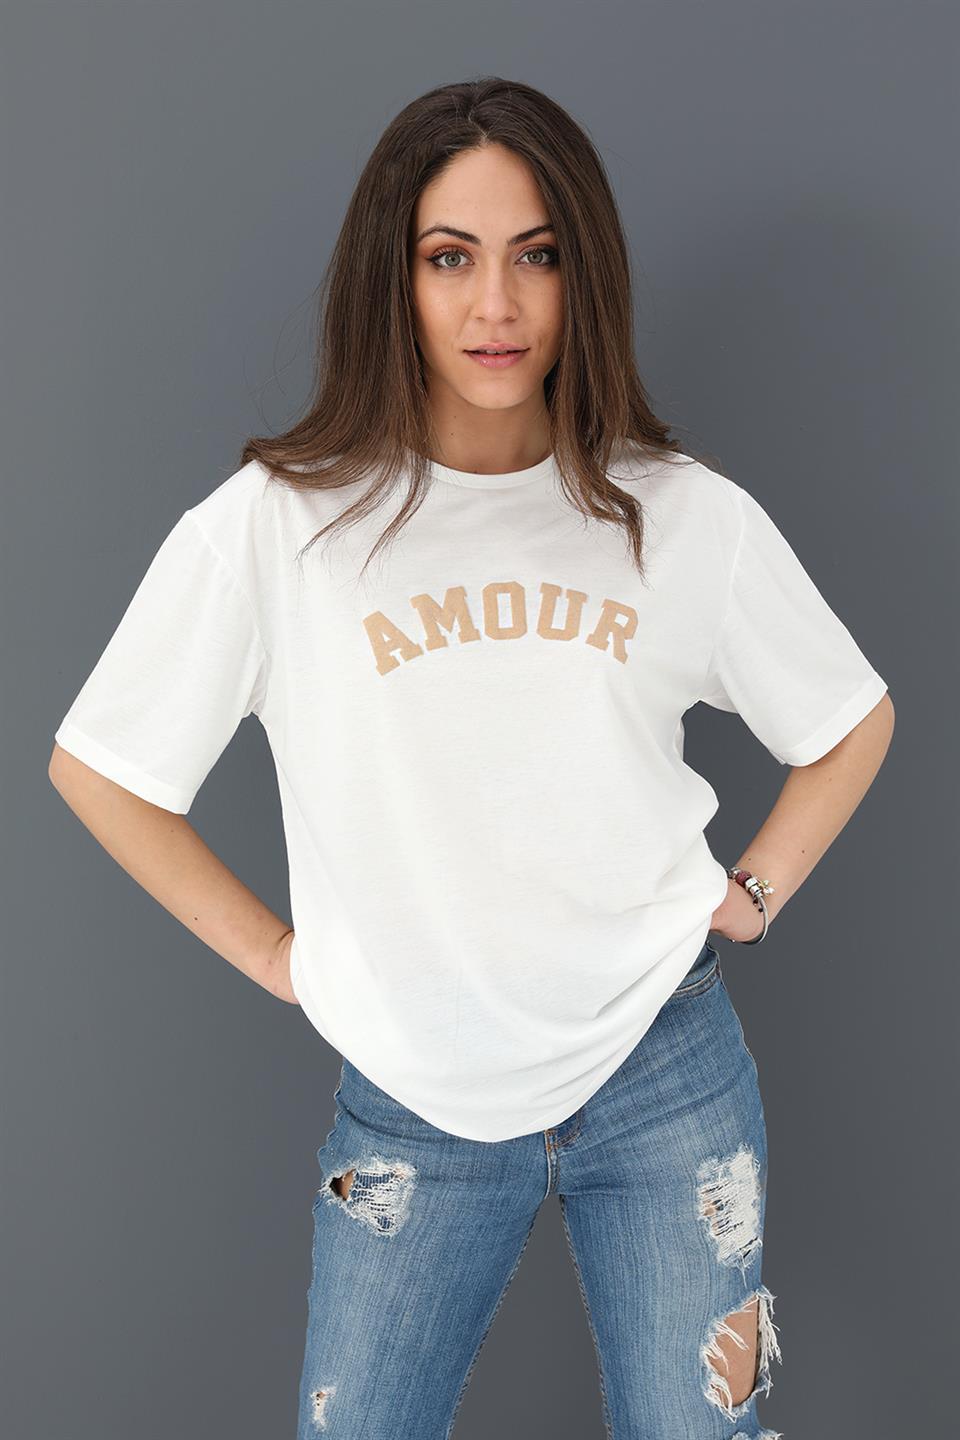 Women's T-shirt Crew Neck Amour Printed - Beige - STREETMODE™